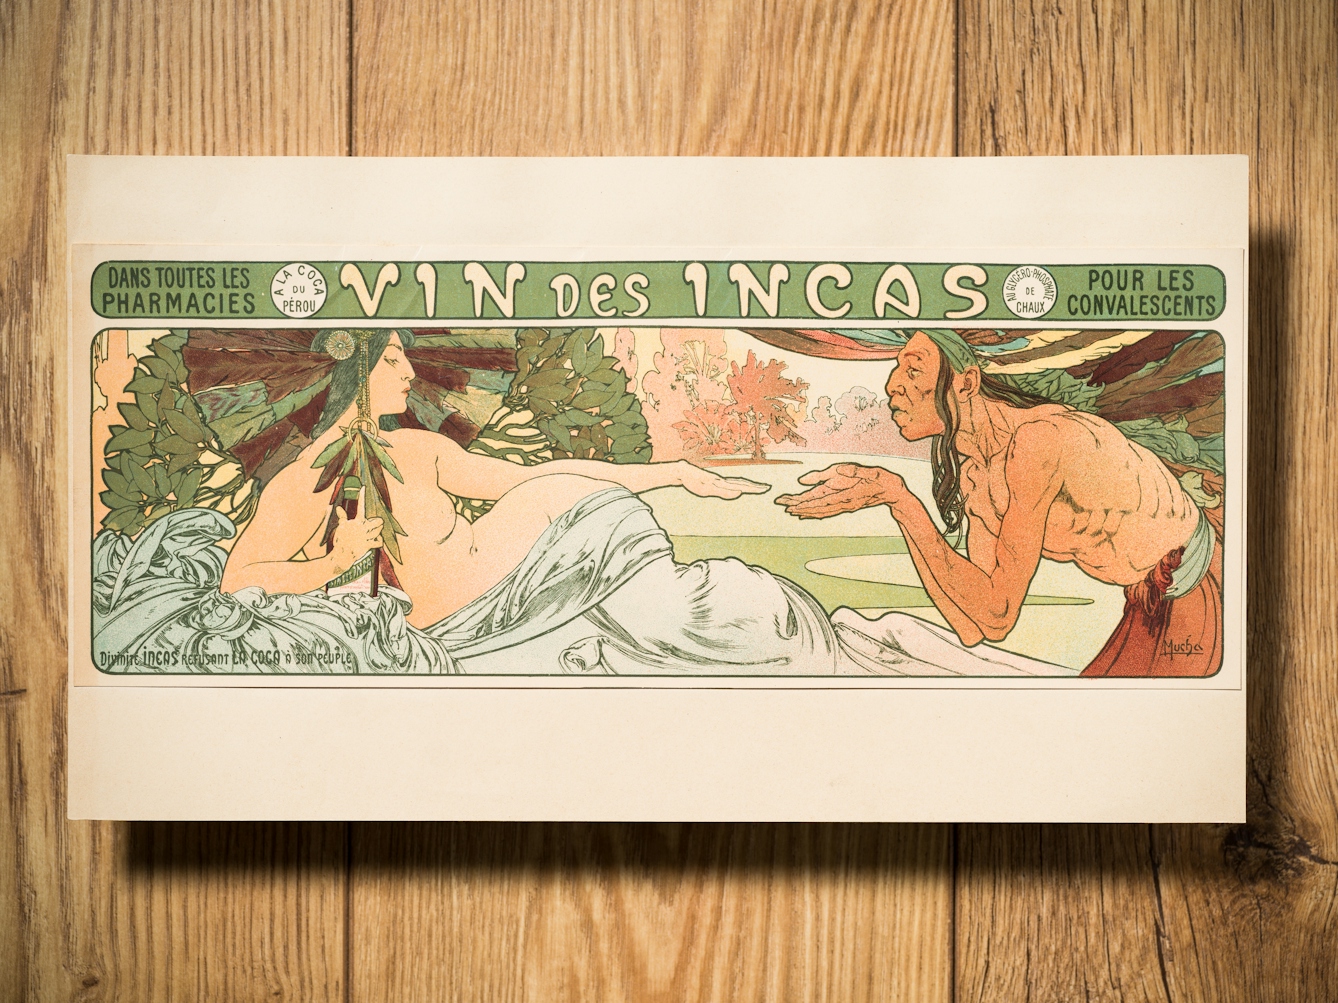 Photograph of an item of ephemera in the Wellcome library, photographed on a wooden tabletop. The advert is for 'Vin des Incas' and shows an Inca man requesting that a goddess of the Incas hand over coca, but she refuses, holding a bottle of coca wine for herself. 